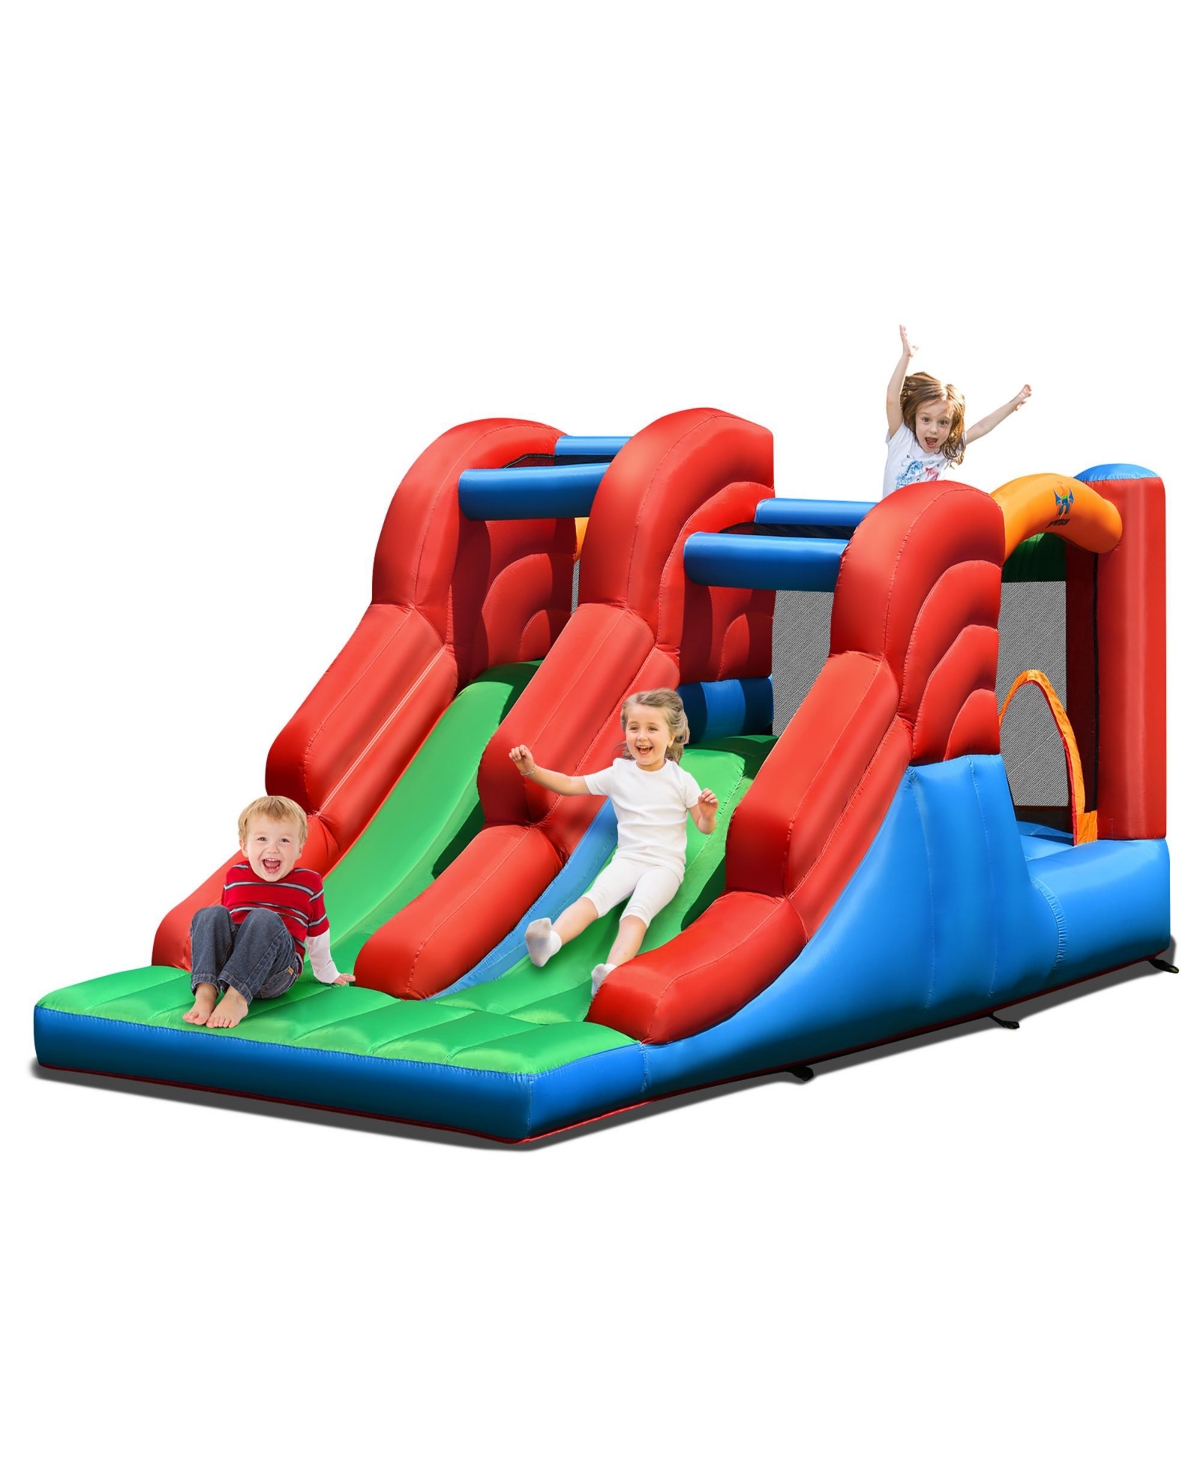 Bounce House 3-in-1 Dual Slides Jumping Castle Bouncer without Blower - Red